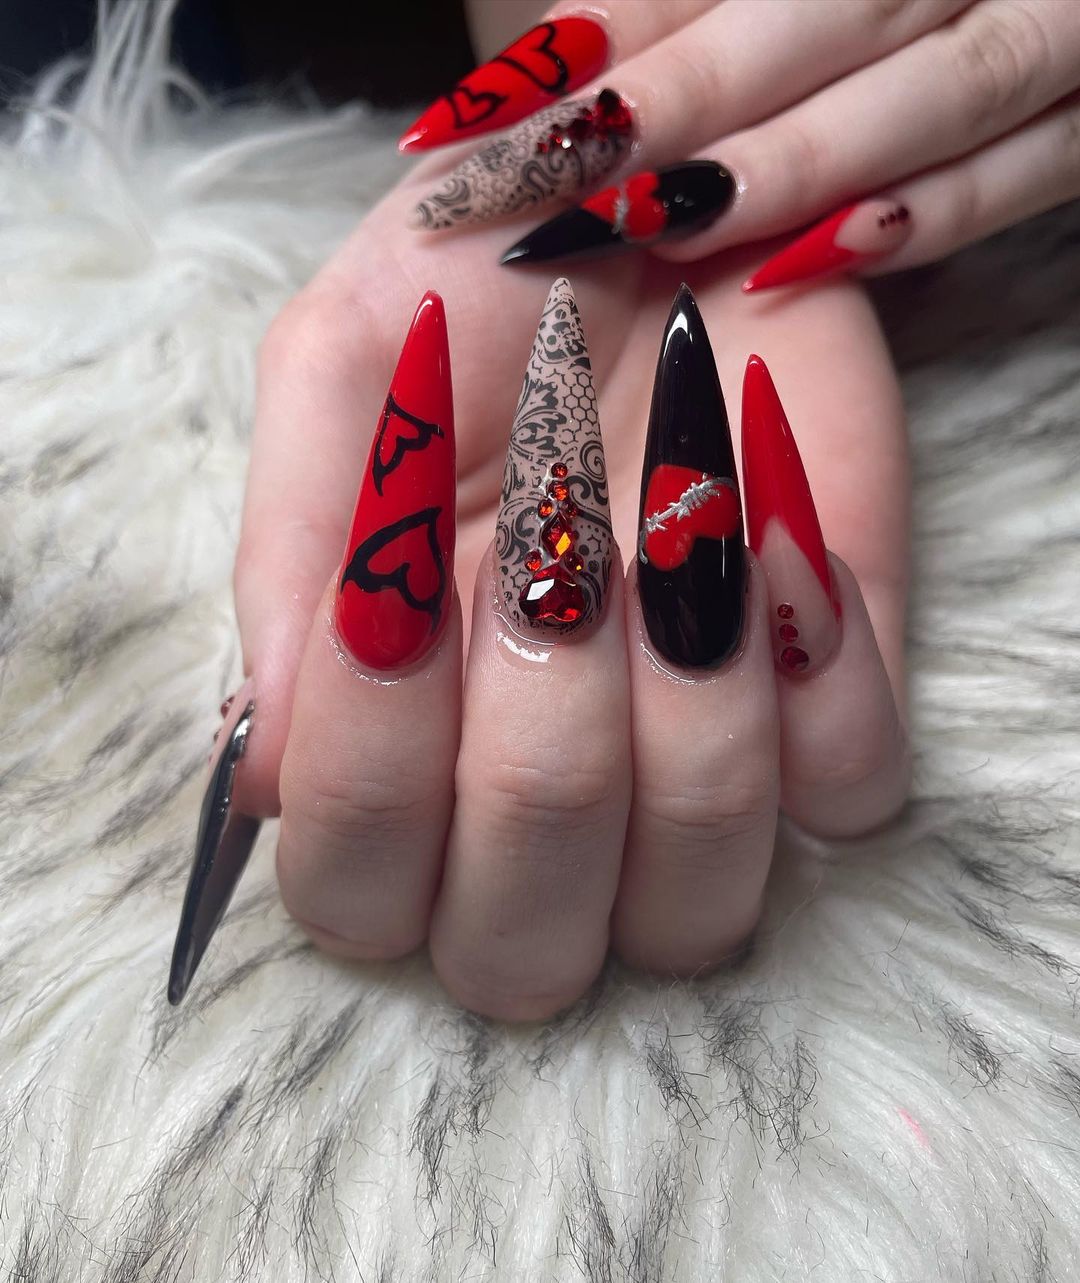 Red and Black Nail Designs